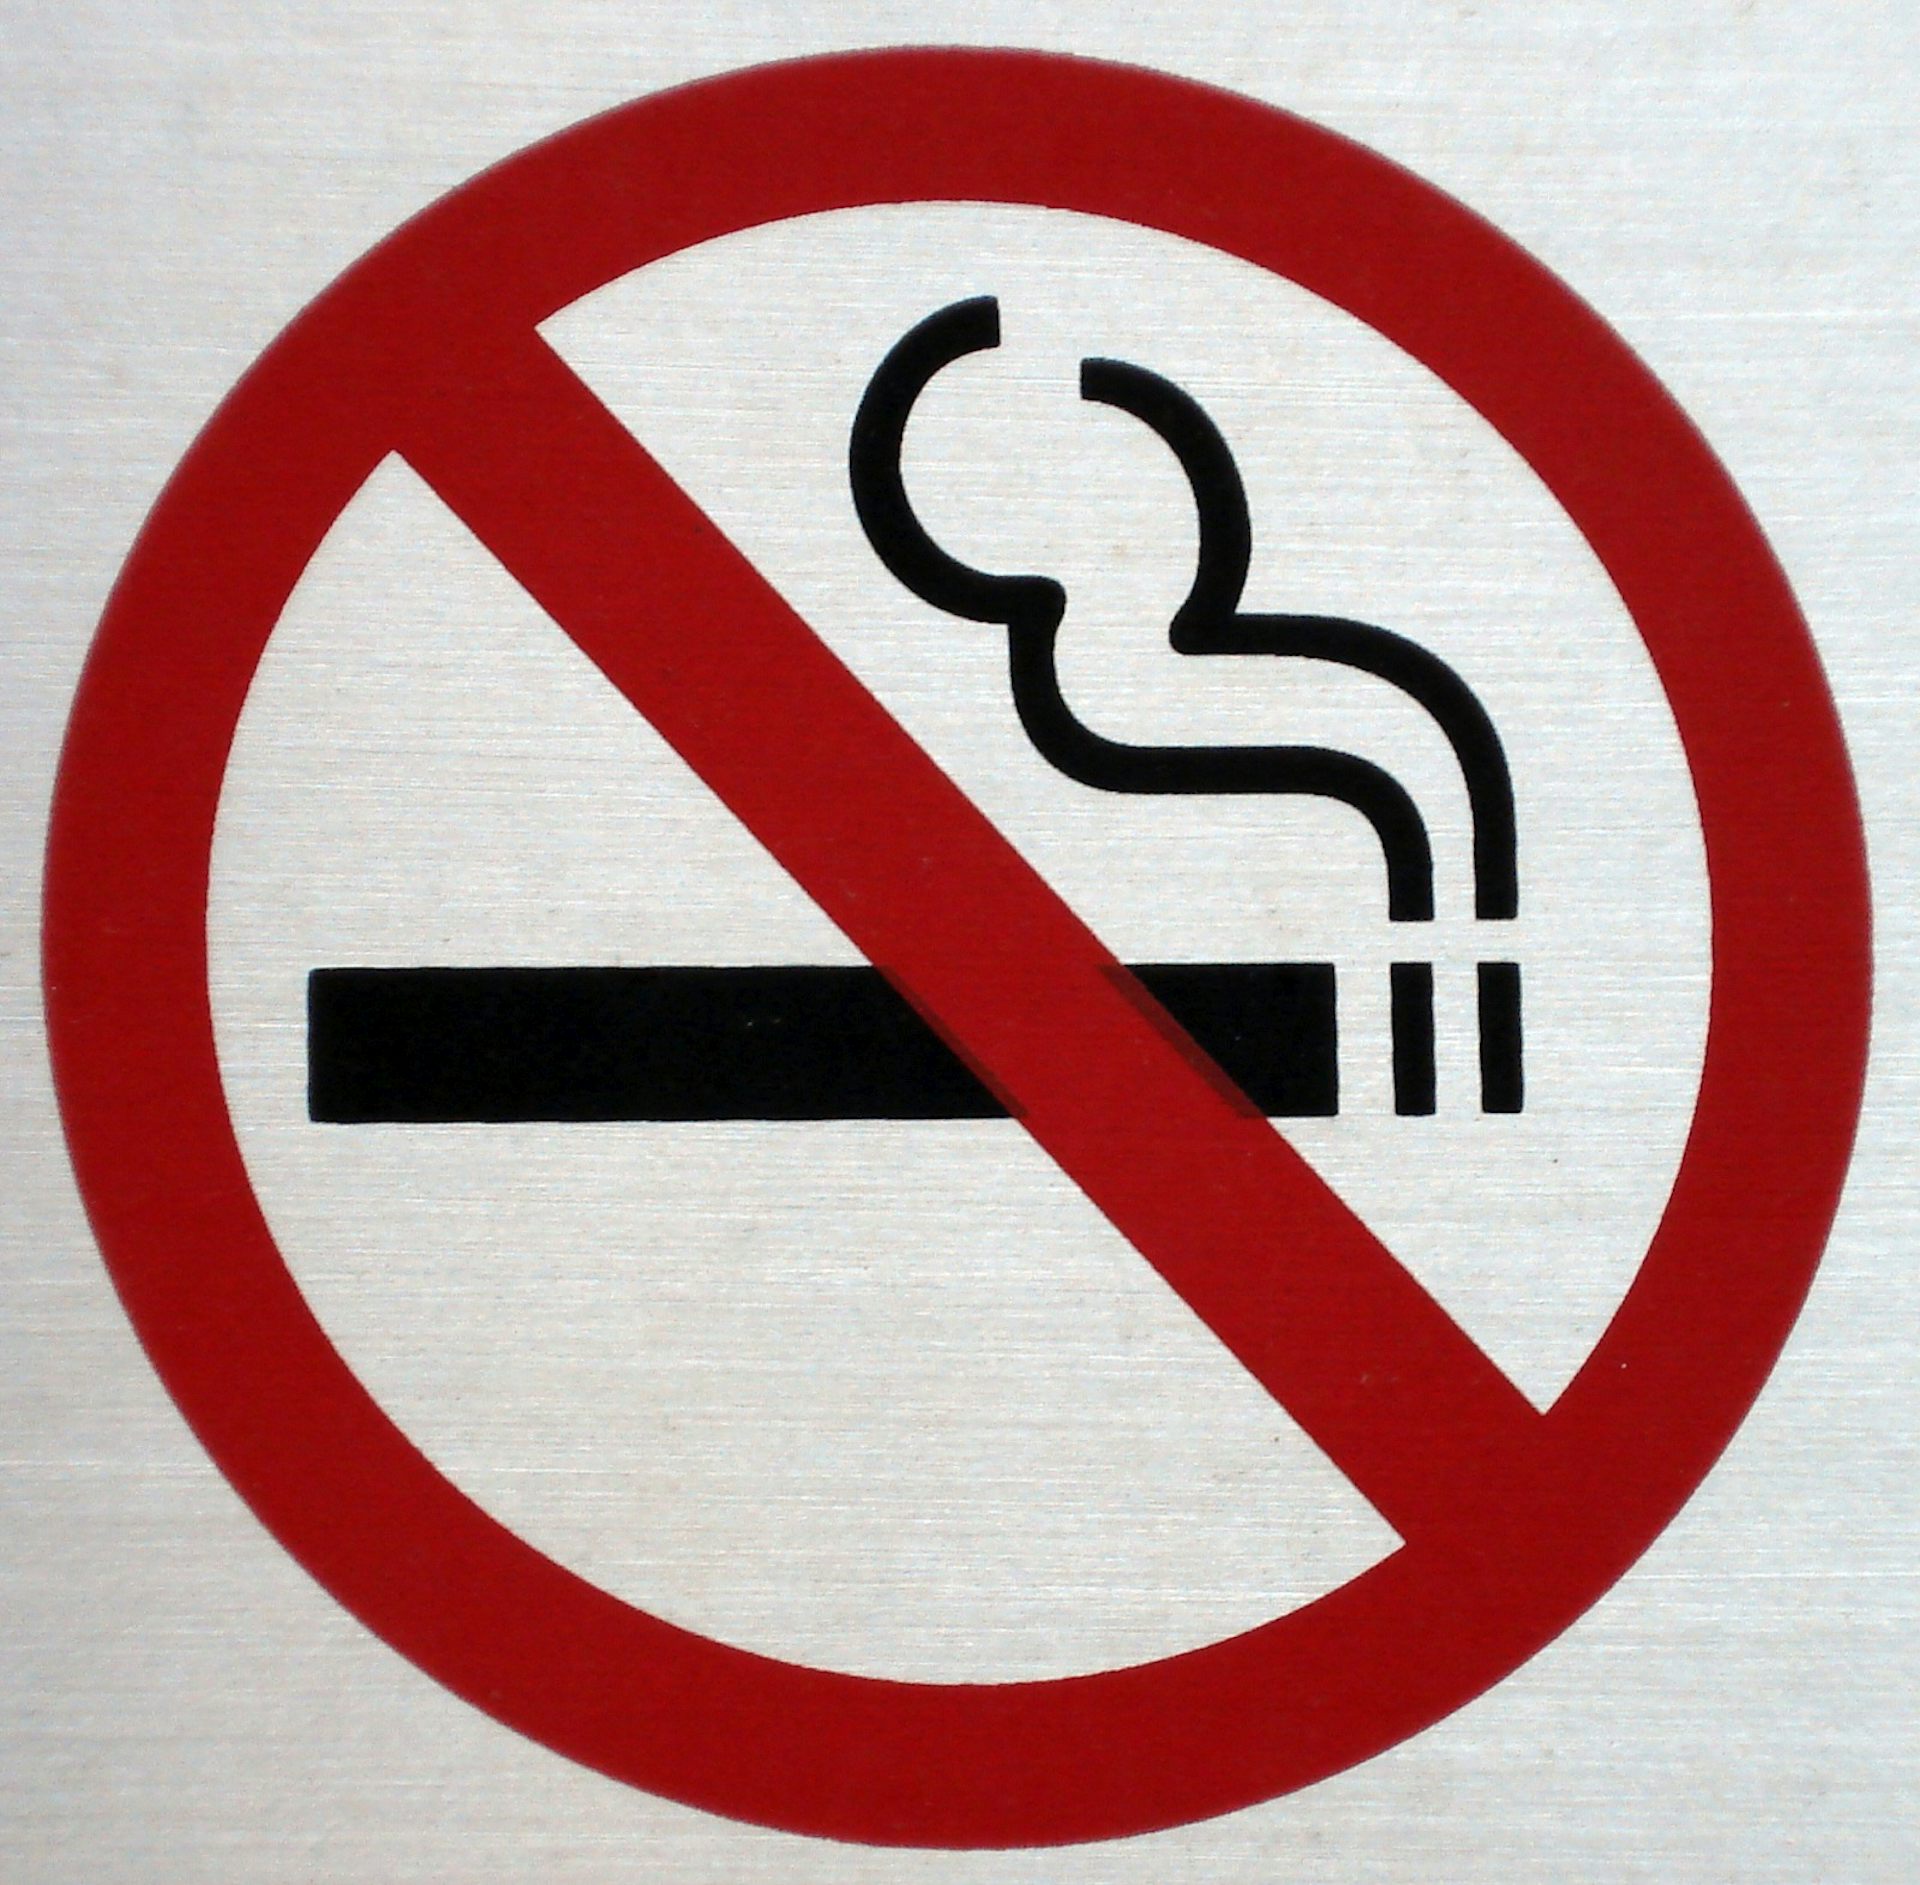 Anti-smoking signs may cause people to reach for cigarettes